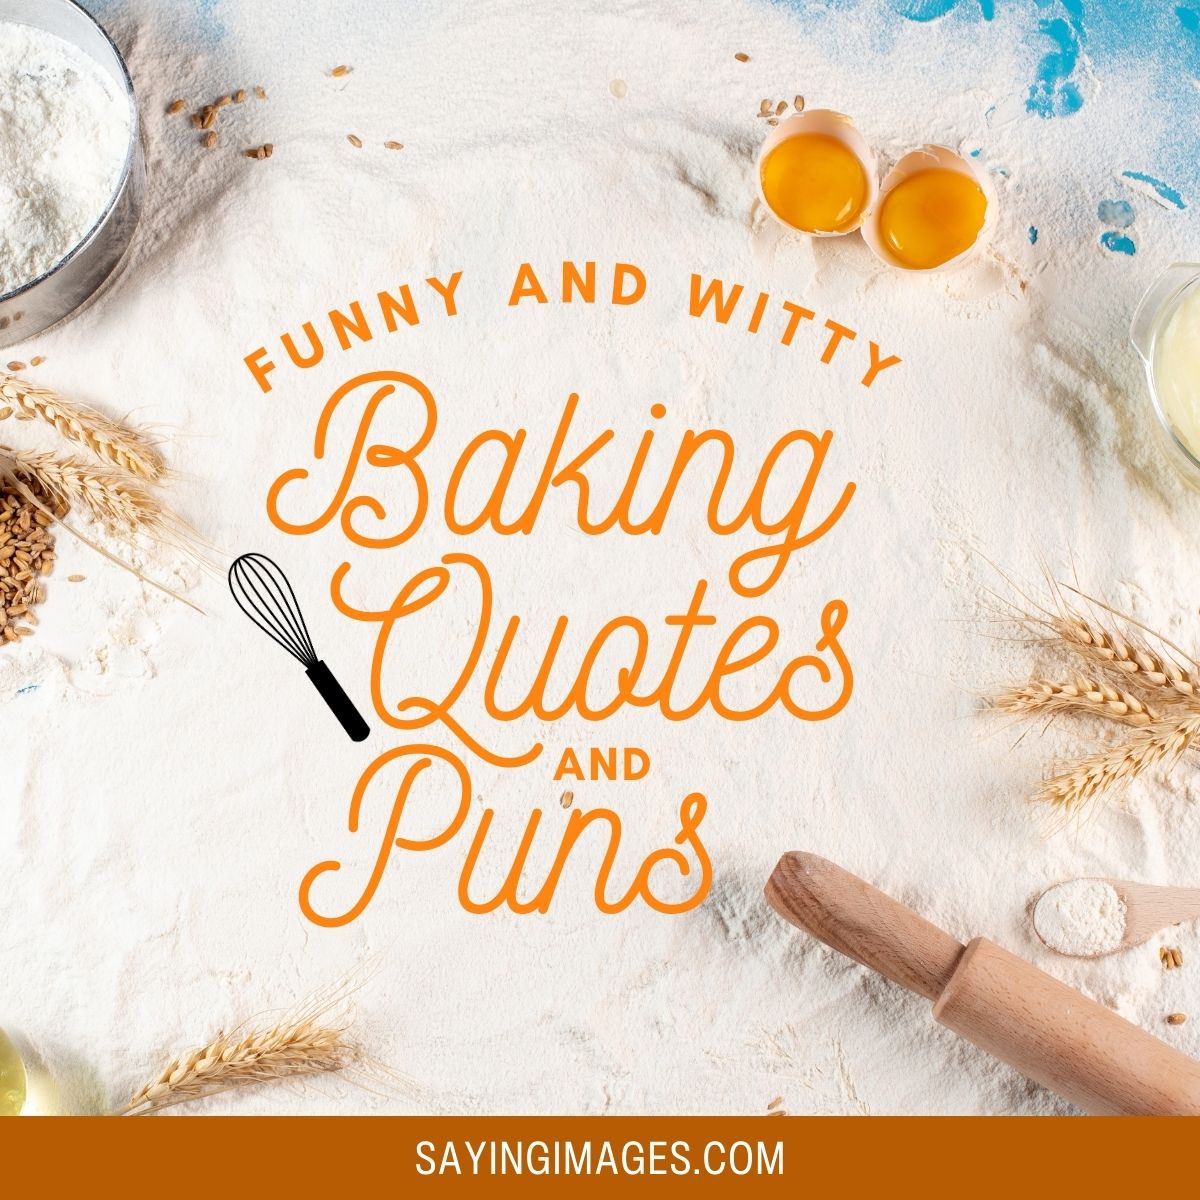 Witty Baking Quotes And Puns